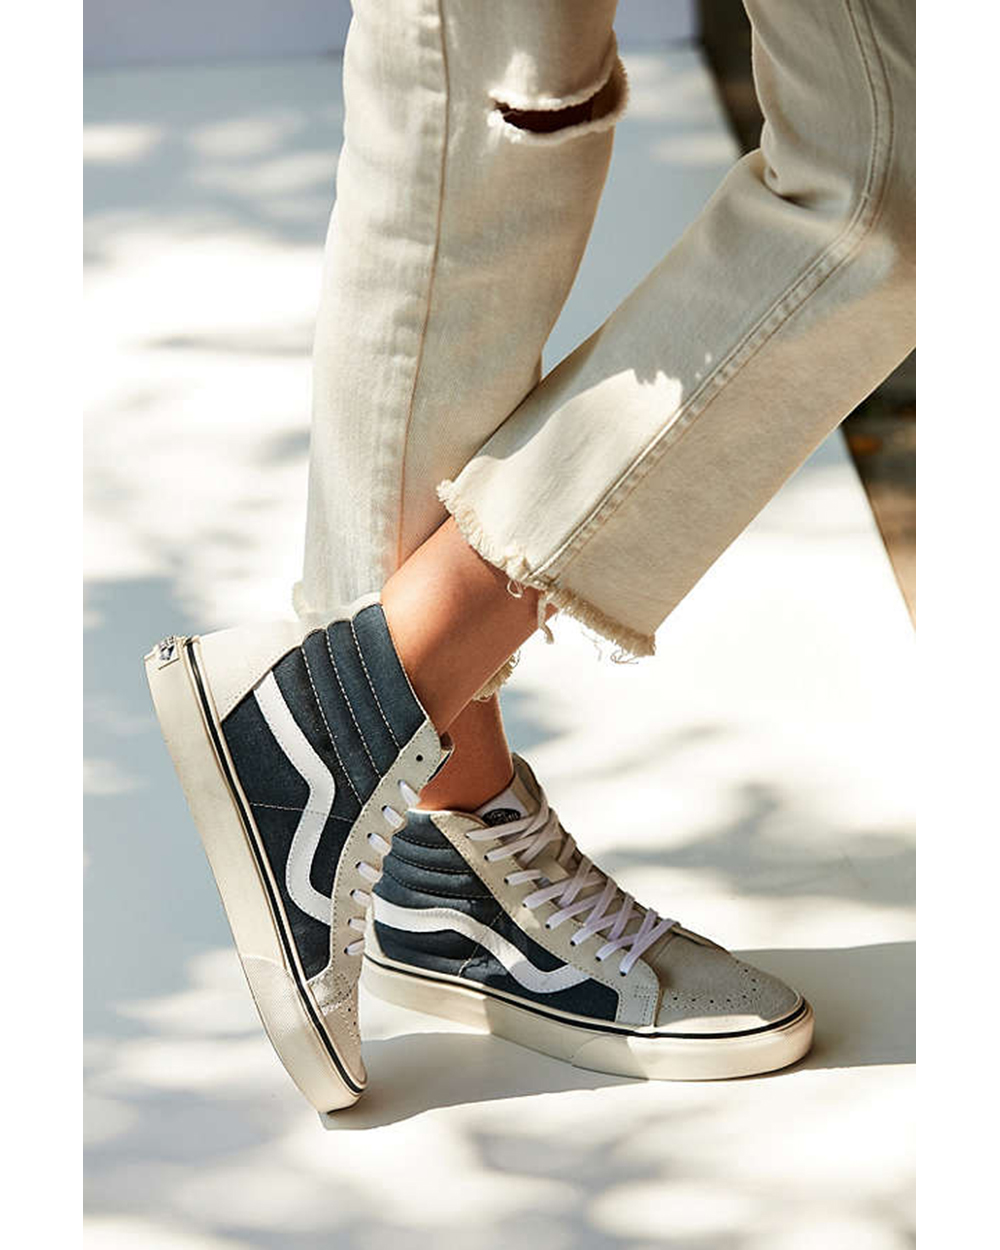 Vans sneakers, $70 USD from Urban Outfitters